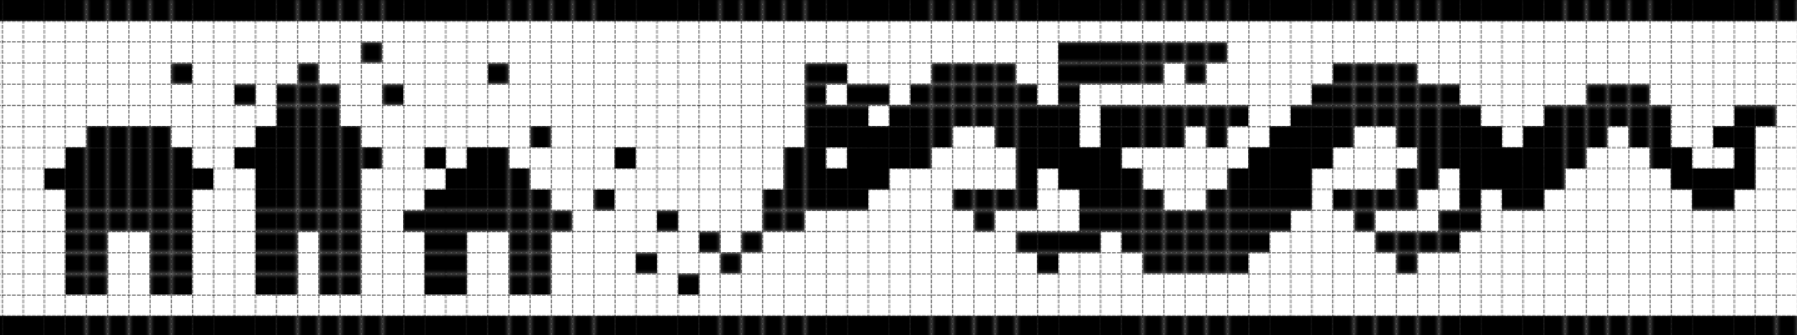 black and white gridded pattern of a dragon attacking a small village